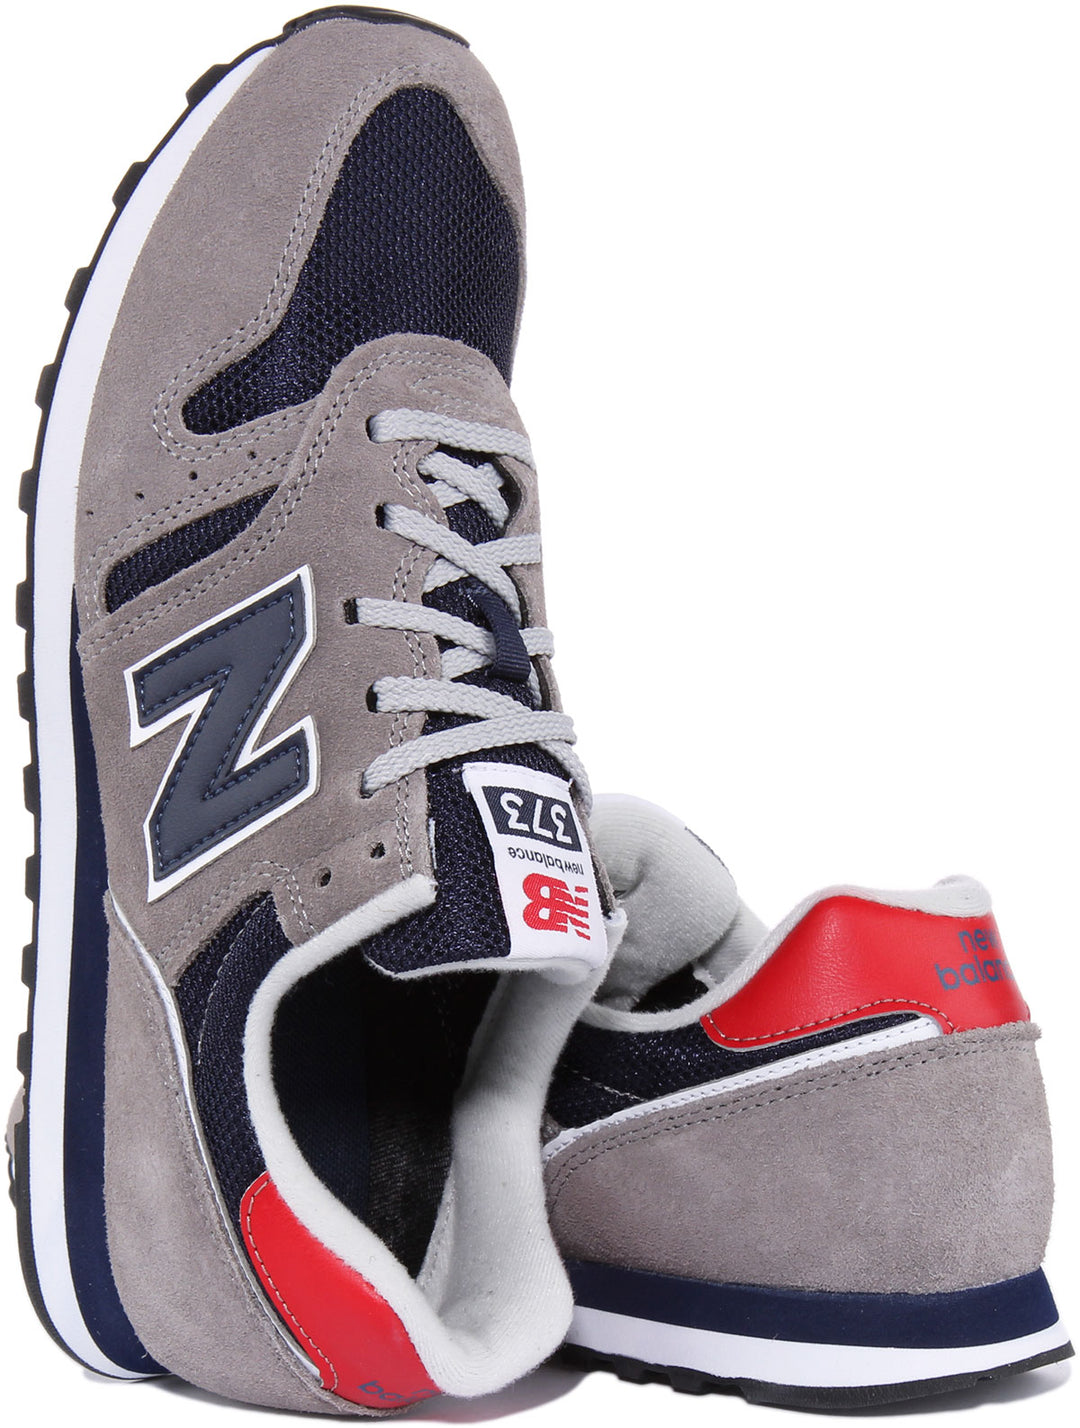 New Balance ML 373 CT2 In Grey Red